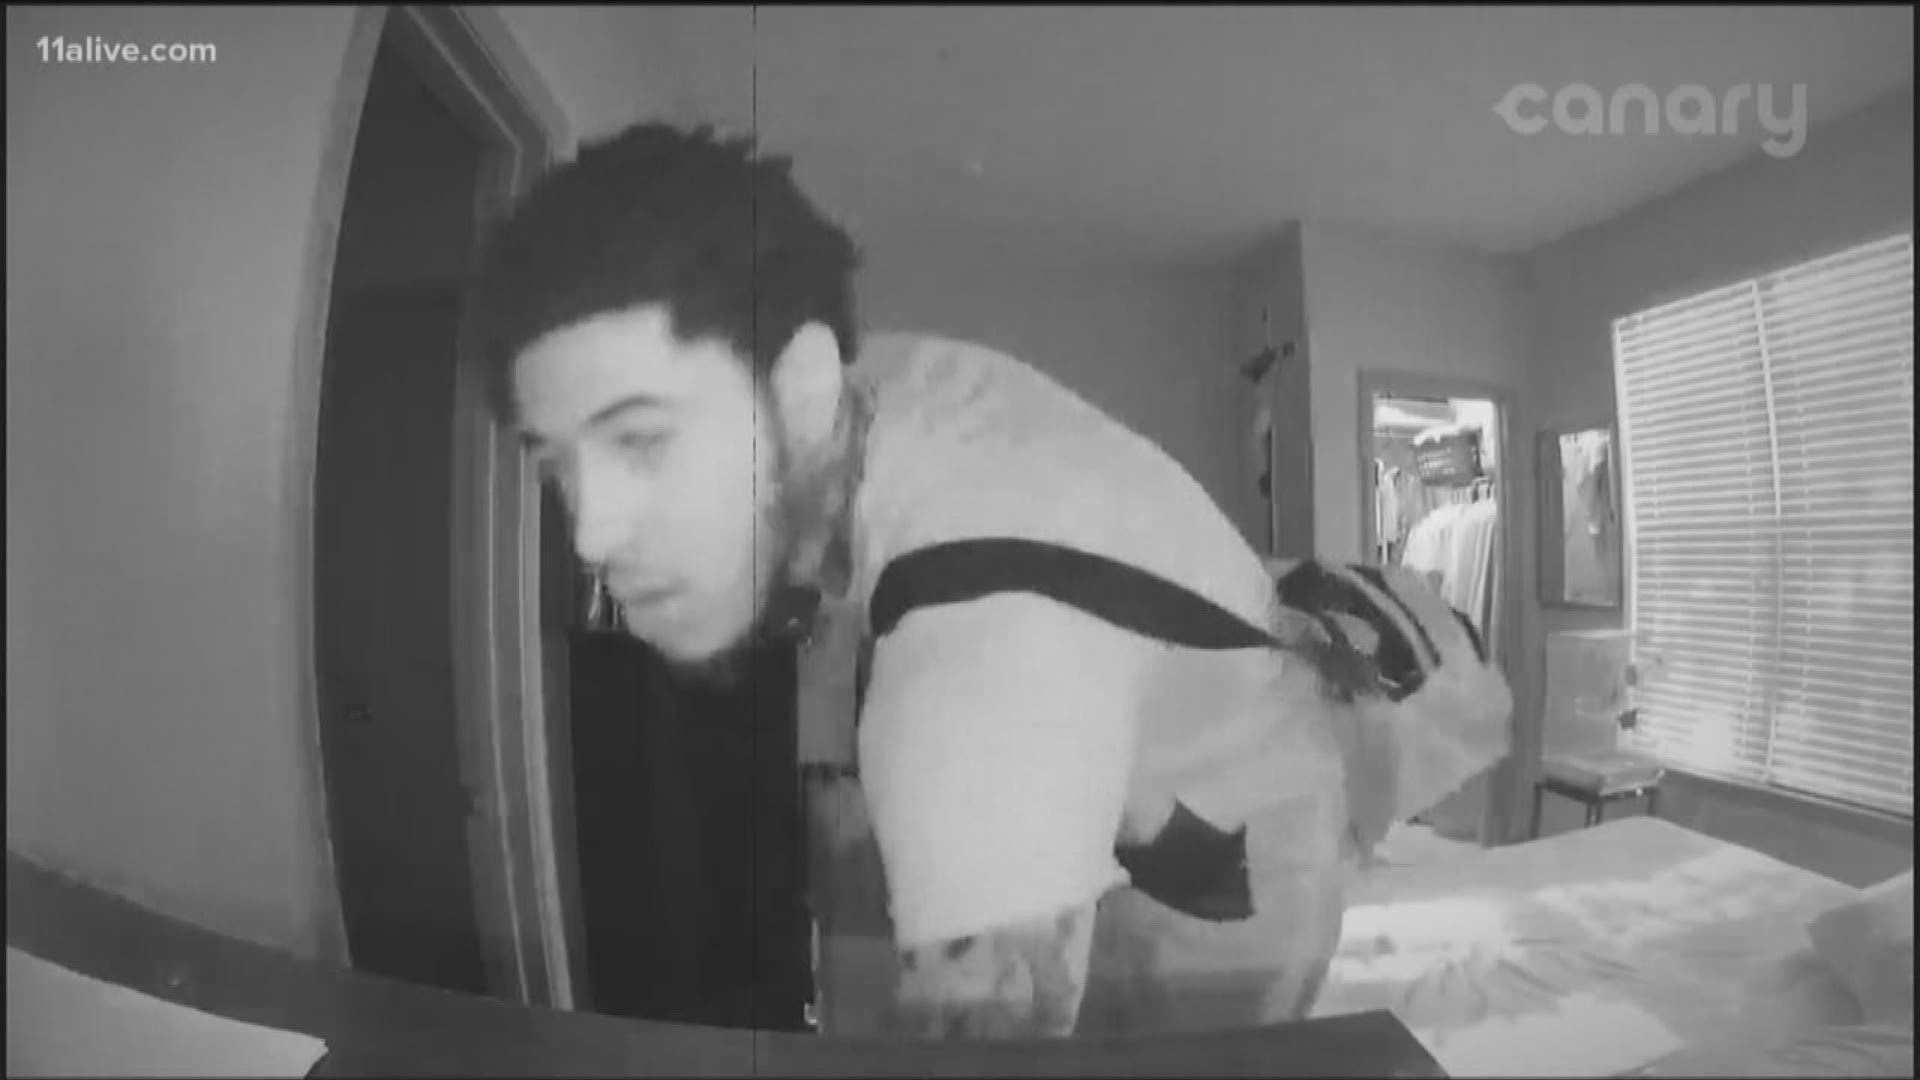 The resident told 11Alive he received an alert on his phone that the security camera was activated in his bedroom.